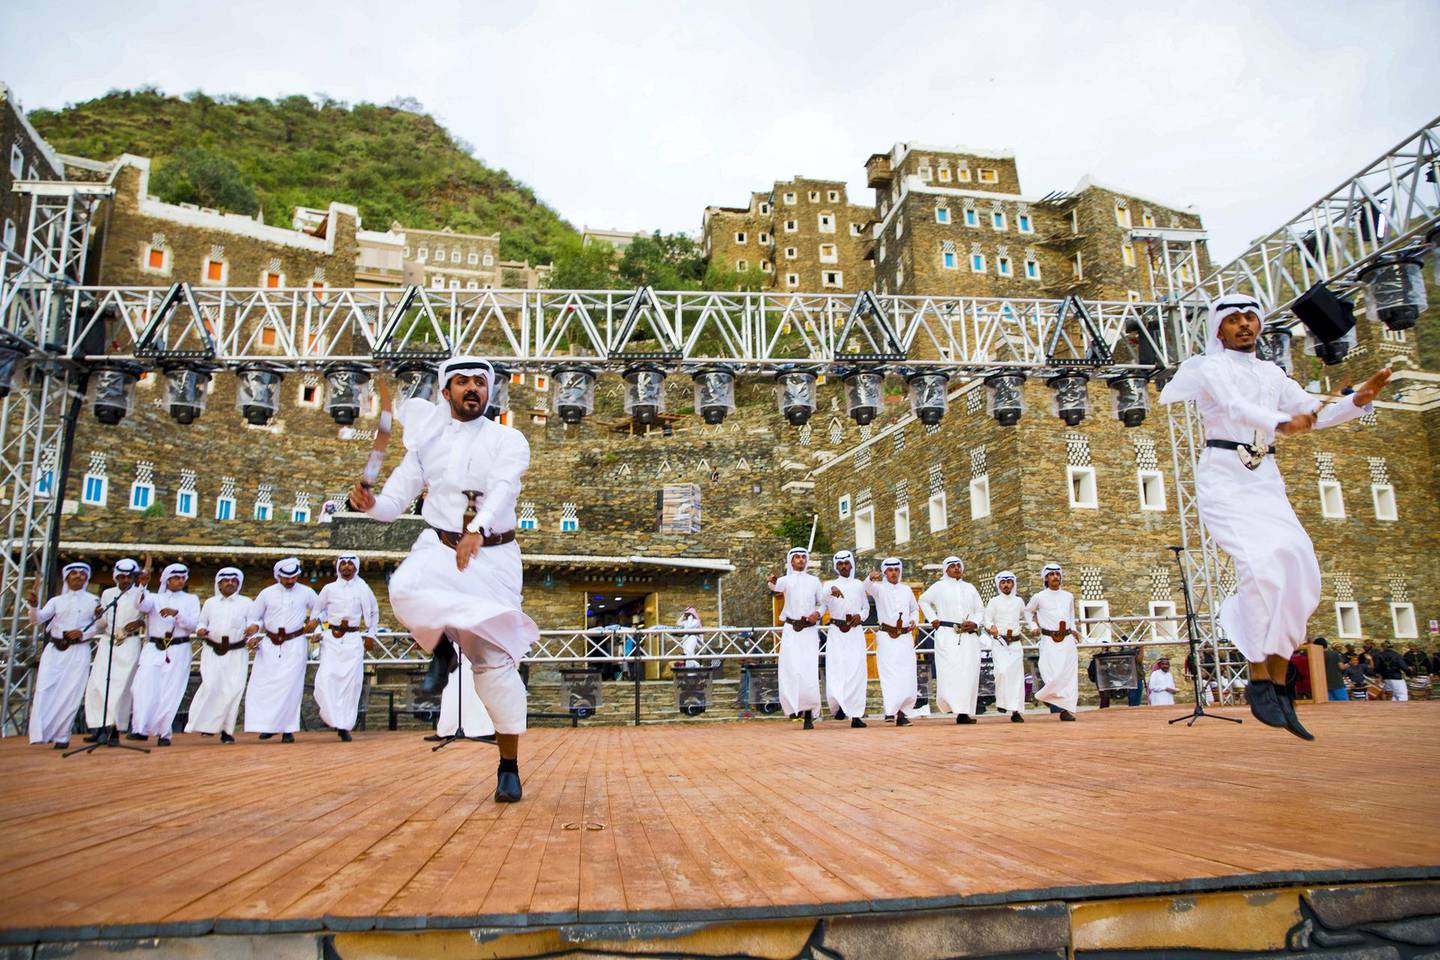 A performance on stage as part of the Flower Men festival. Courtesy of Saudi MOC